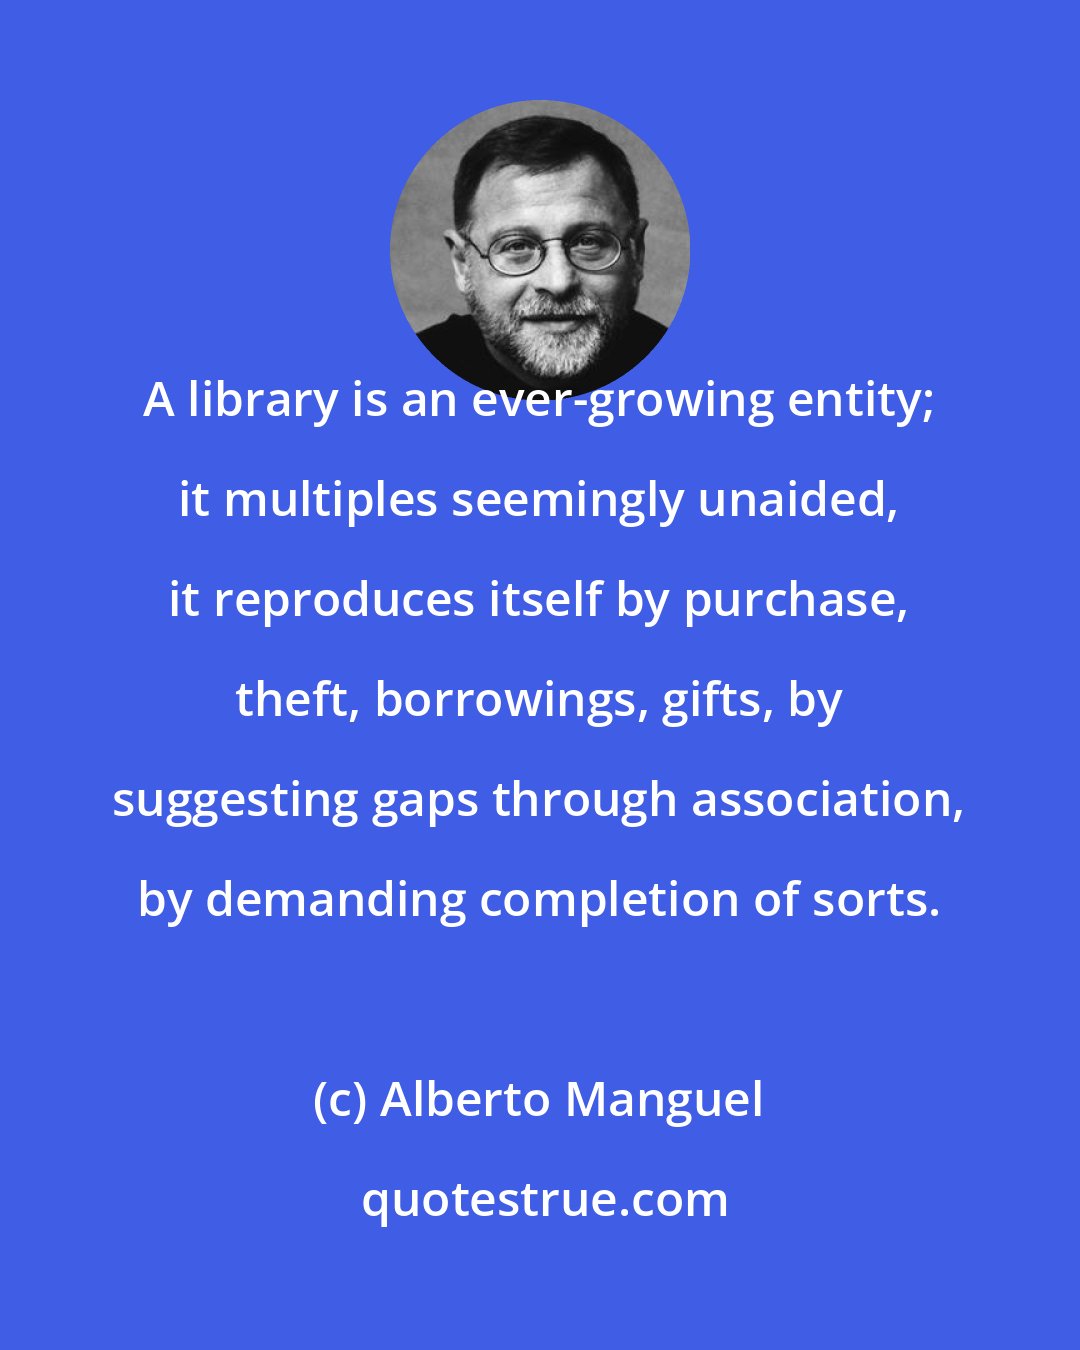 Alberto Manguel: A library is an ever-growing entity; it multiples seemingly unaided, it reproduces itself by purchase, theft, borrowings, gifts, by suggesting gaps through association, by demanding completion of sorts.